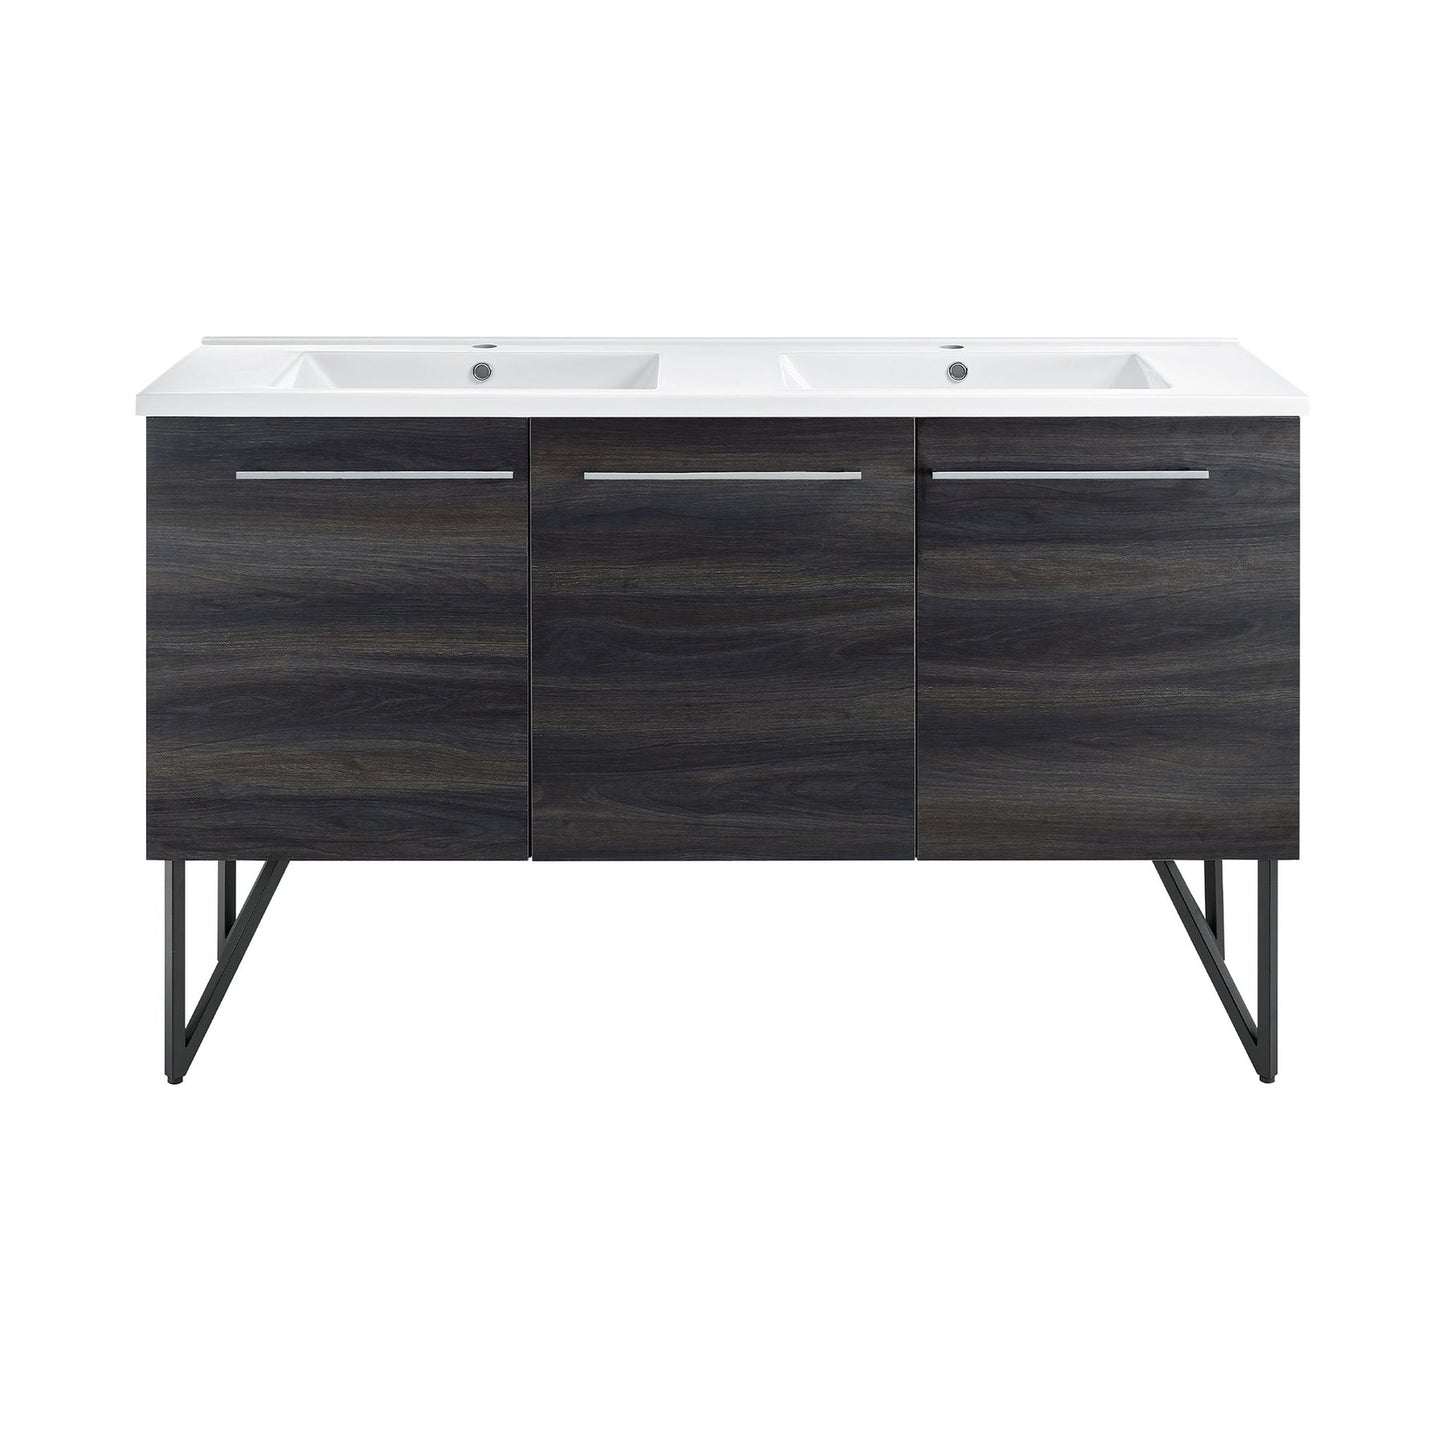 Swiss Madison Annecy 60" x 36" Freestanding Black Walnut Bathroom Vanity With Ceramic Double Sink and Stainless Steel Metal Legs